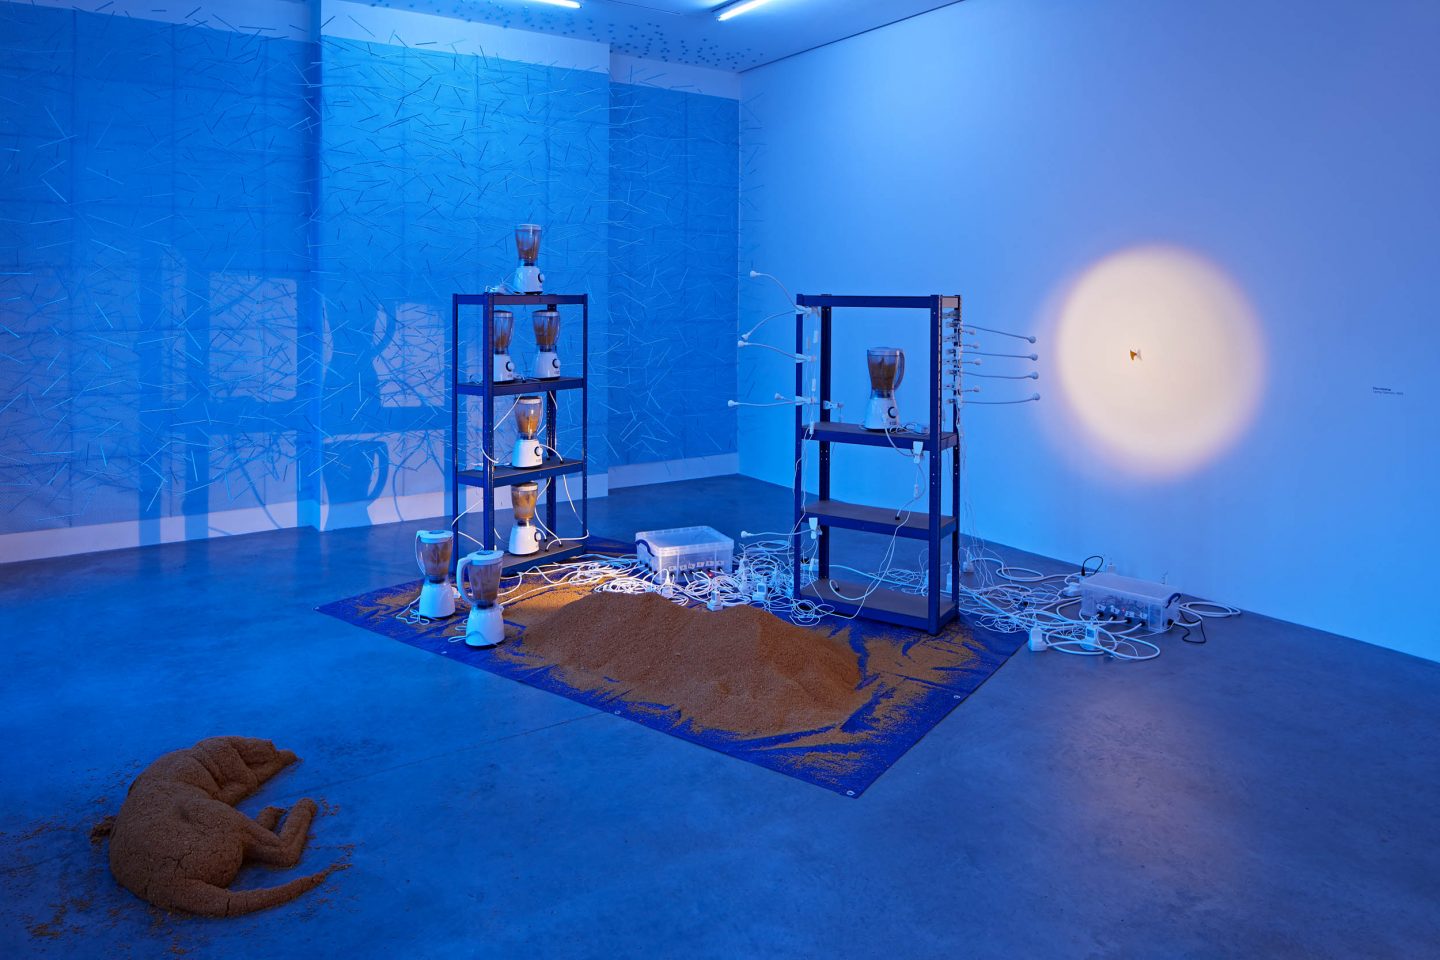 Clara Hastrup, Lapdog Tabernam, 2019. Bloomberg New Contemporaries 2020, installation view at the South London Gallery. Photo: Andy Stagg
